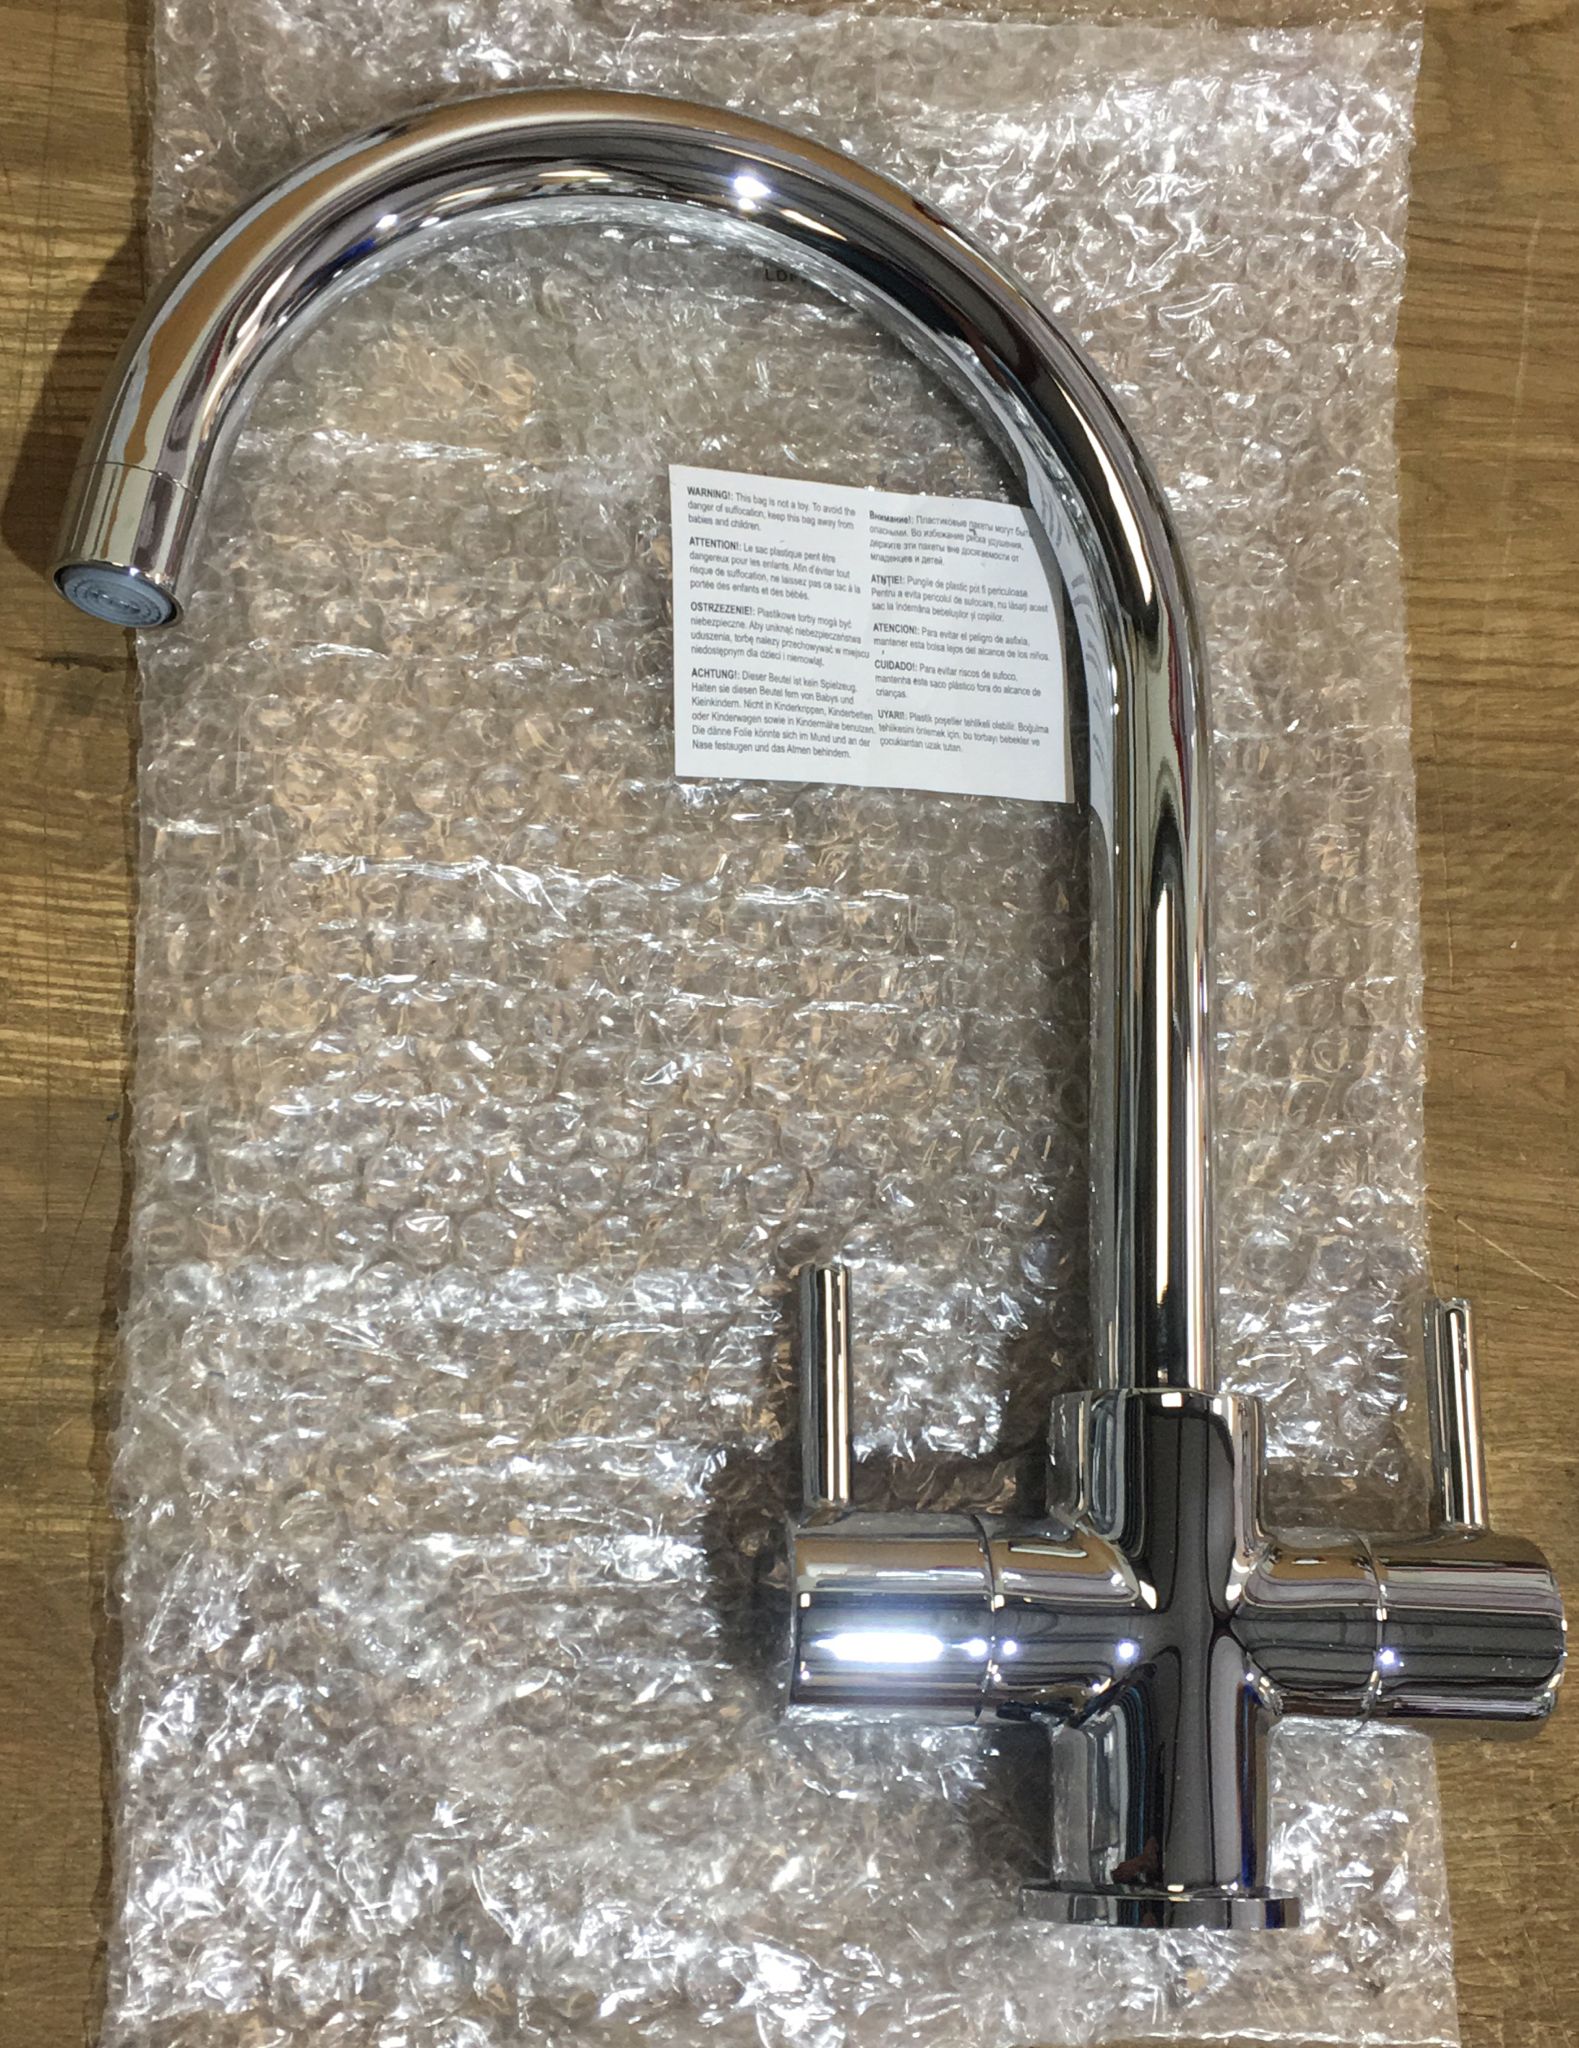 Cooke & Lewis Amsel Chrome effect Kitchen Twin lever Tap ¼ turn handle 0303